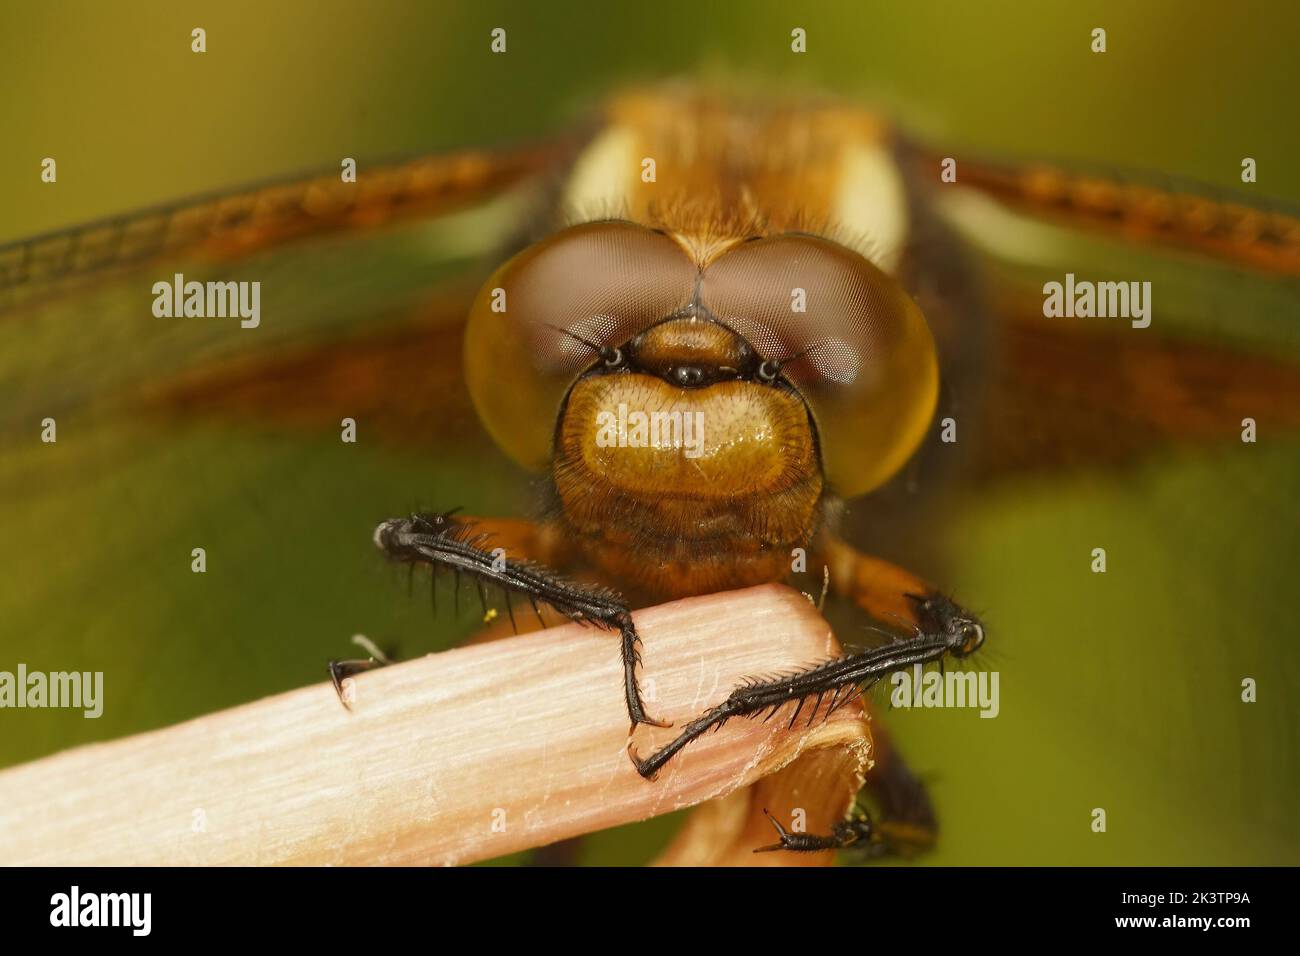 Facial detailed closeup on a female broad-bodied darter dragonfly, Libellula depressa hanging on a twig Stock Photo